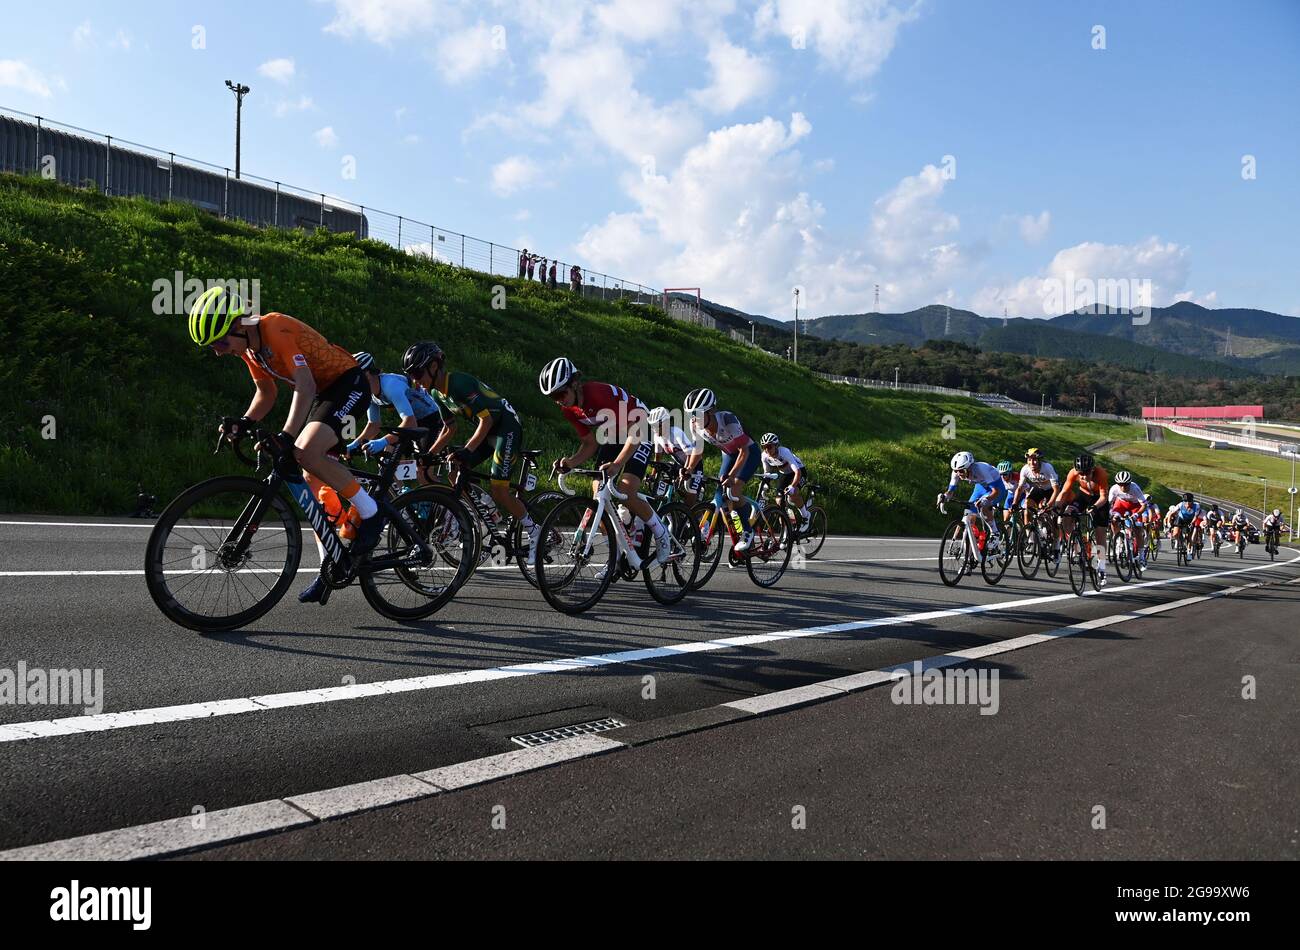 Shizuoka, Japan. 25th July, 2021. Riders compete during the women's cycling road race at the Tokyo 2020 Olympic Games in Shizuoka, Japan, July 25, 2021. Credit: He Changshan/Xinhua/Alamy Live News Stock Photo